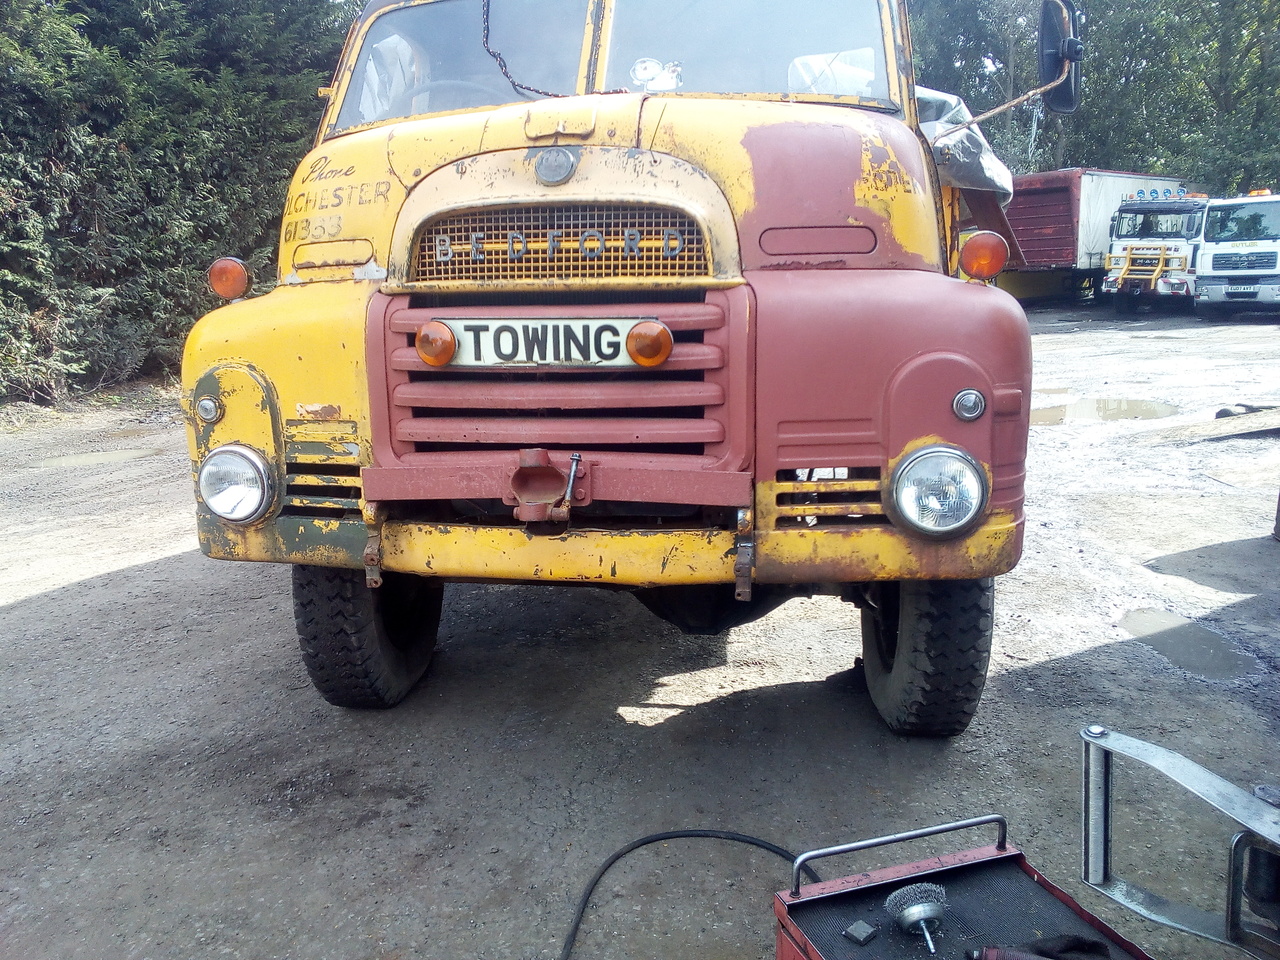 The bedford, parked in a dusty yard, with the front bumper
removed and a visible weld repair to the previously broken bumper
mount.